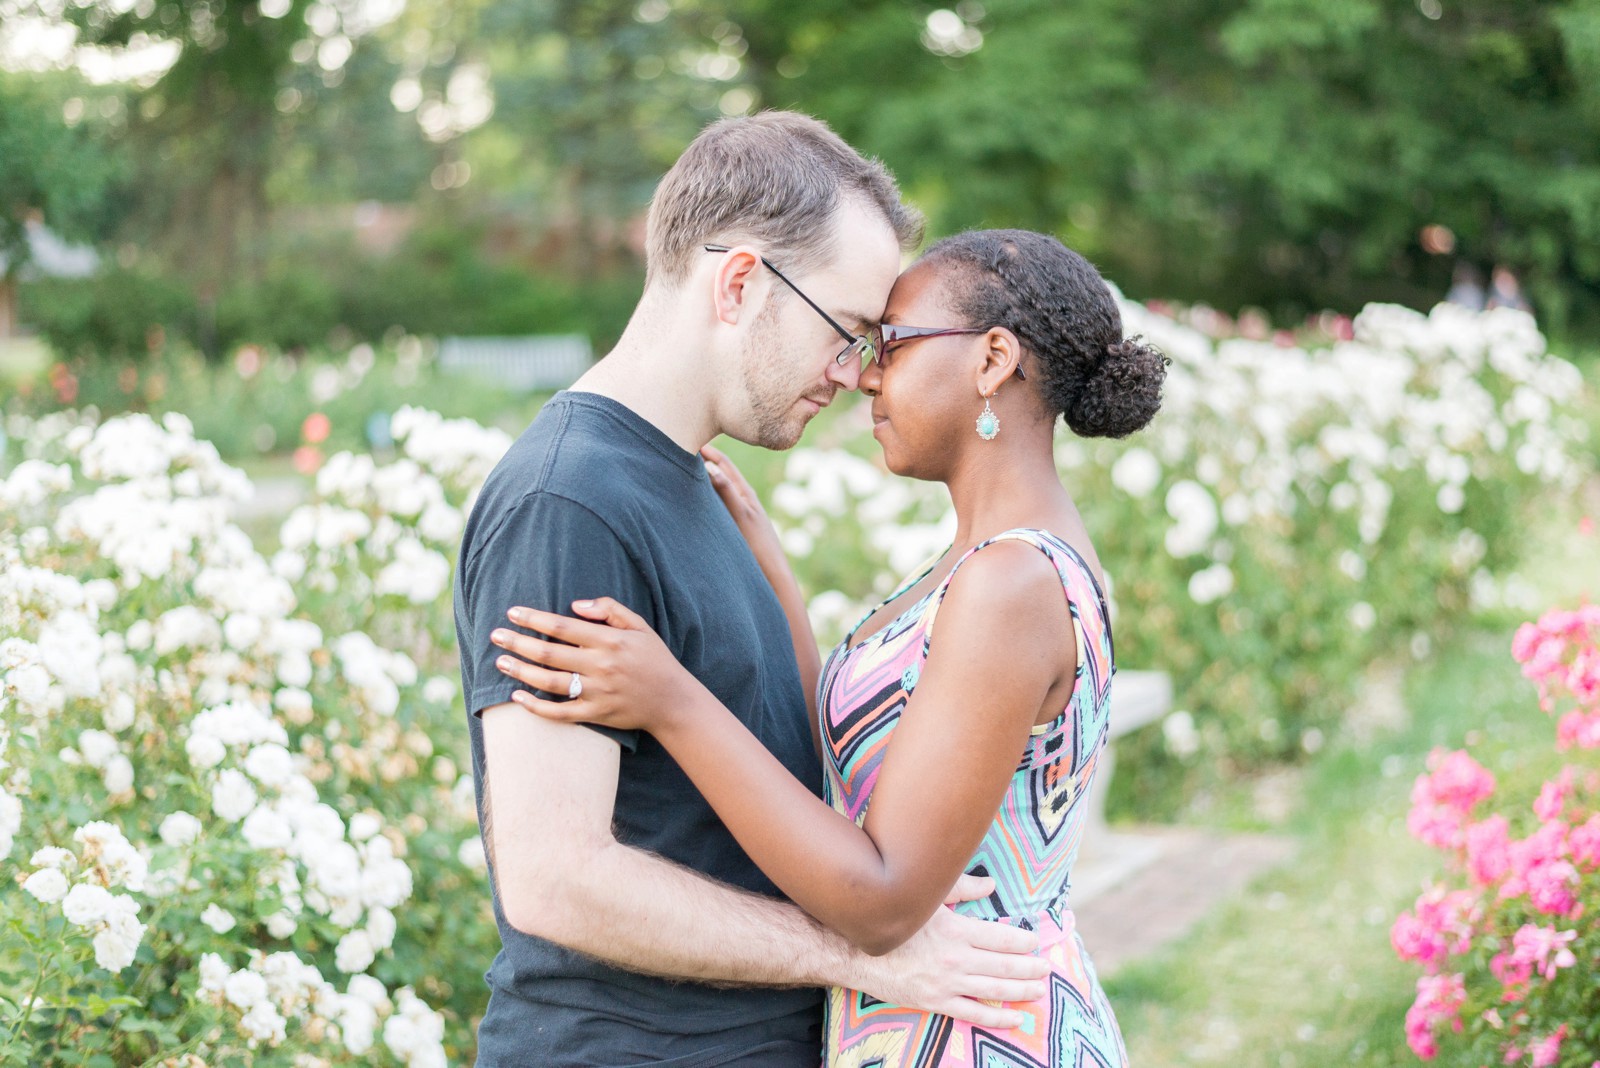 columbus-ohio-engagement-session-at-whetstone-park-of-roses-in-the-summer-time-with-roses_0072